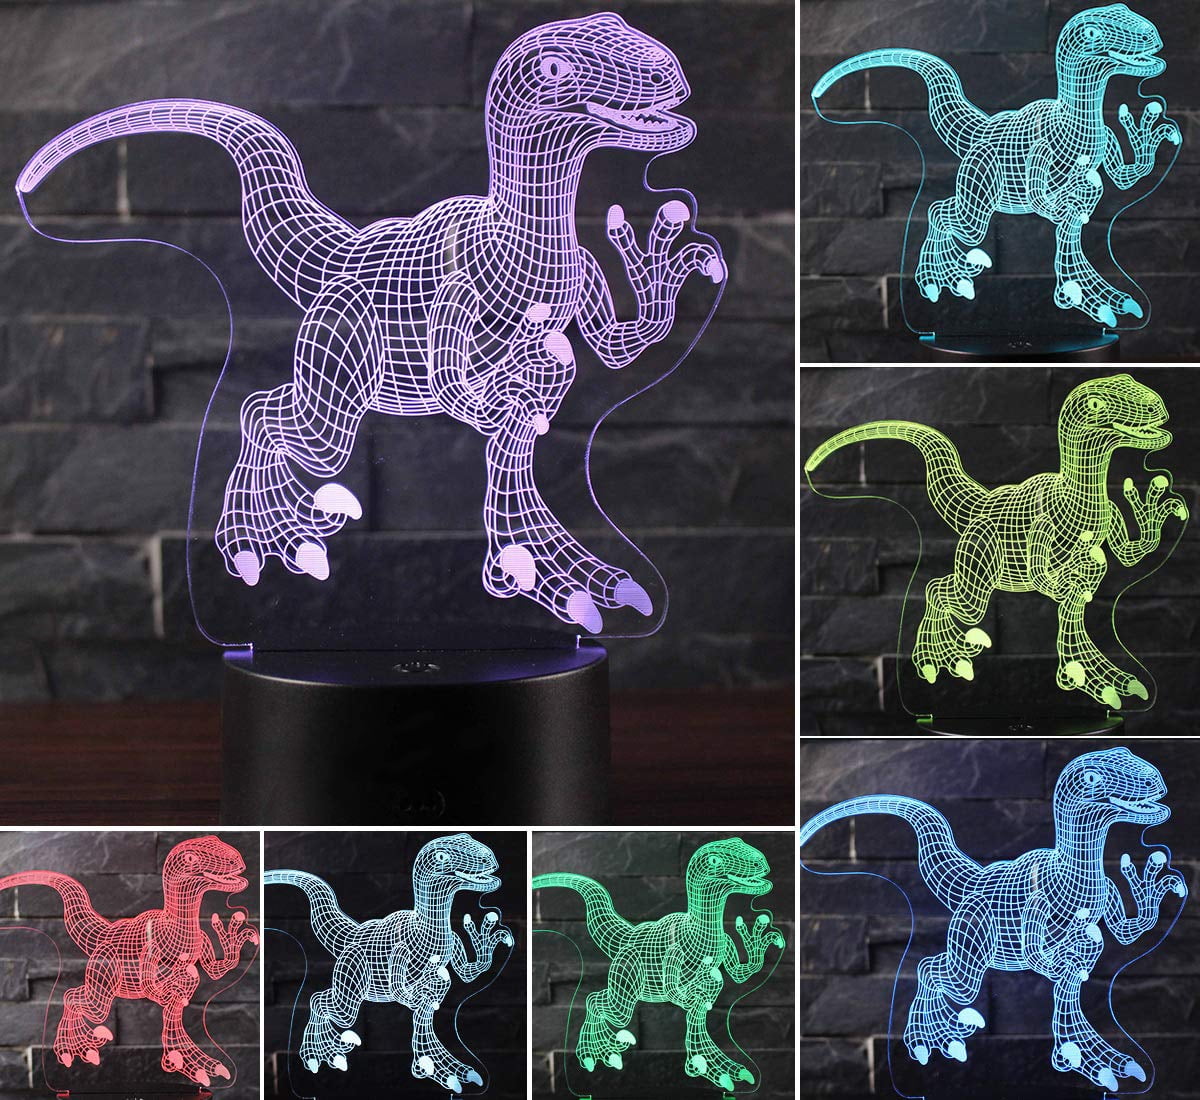 LLAMEVOL Dinosaur Toy Night Lights for Kids Jurassic 3D Illusion Lamp Timer Remote Control Birthday Dino for Boys Girls Home Bedroom Party Supply Decoration 7 Color Crackle Ankylosaurus 